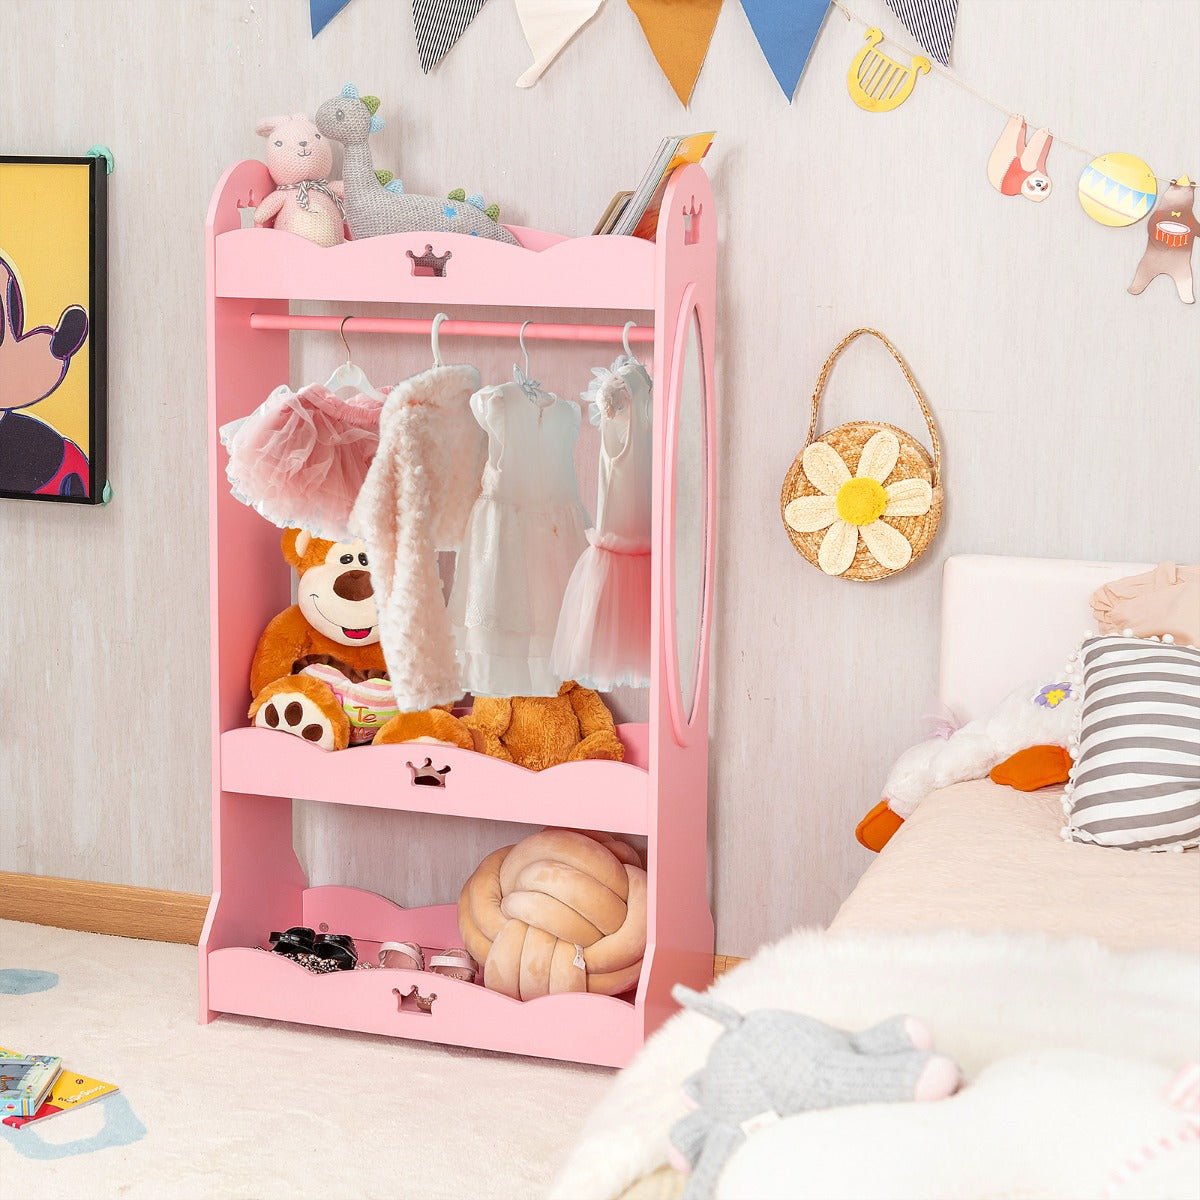 Kids Room Crown Dress-Up Wardrobe - Organize Playful Outfits Delightfully